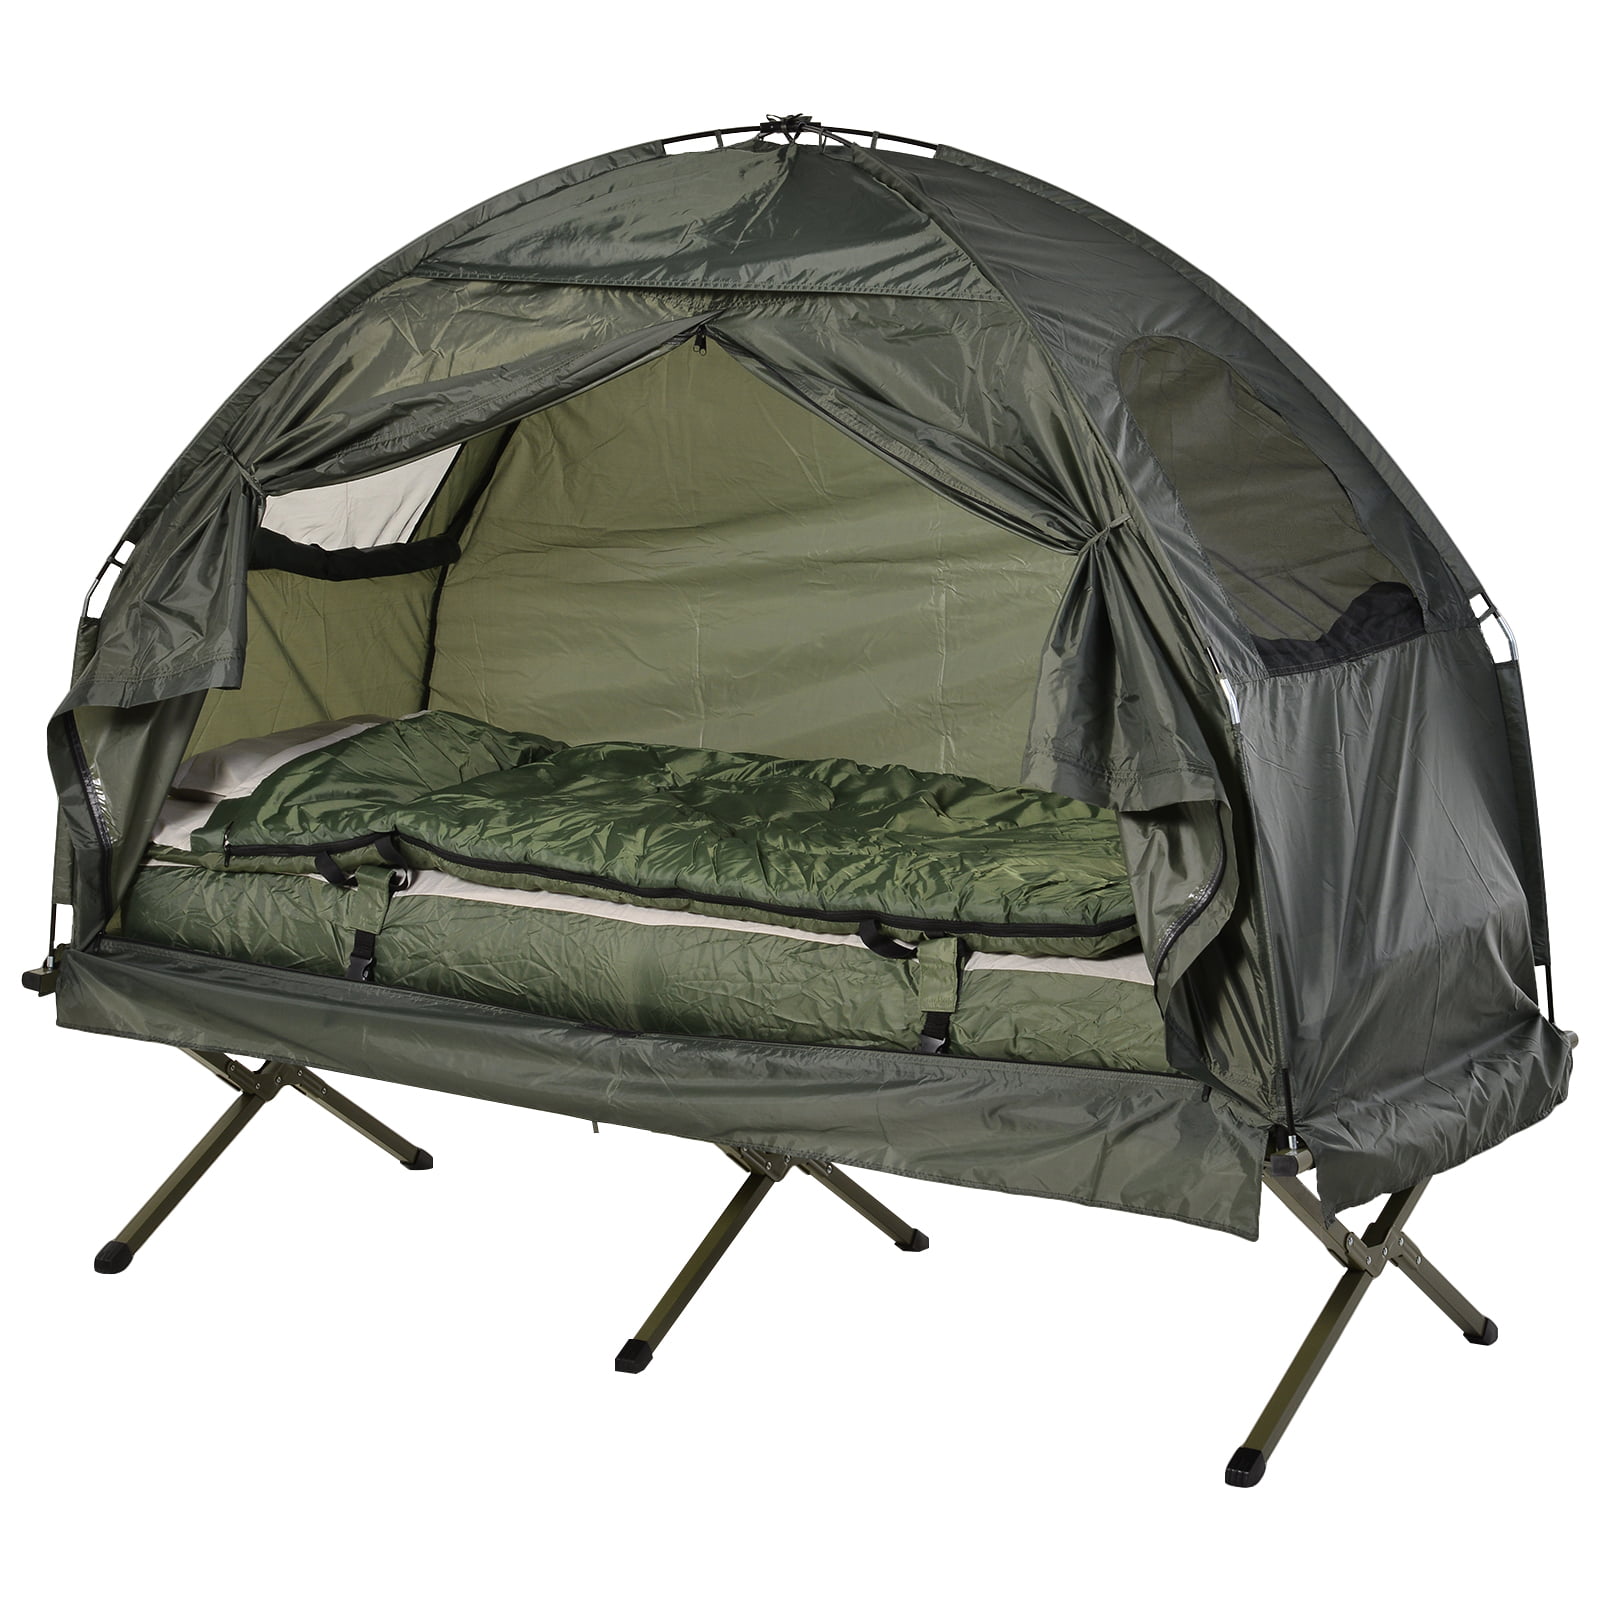 Outsunny Portable Camping Cot Tent with Air Mattress, Sleeping Bag, and